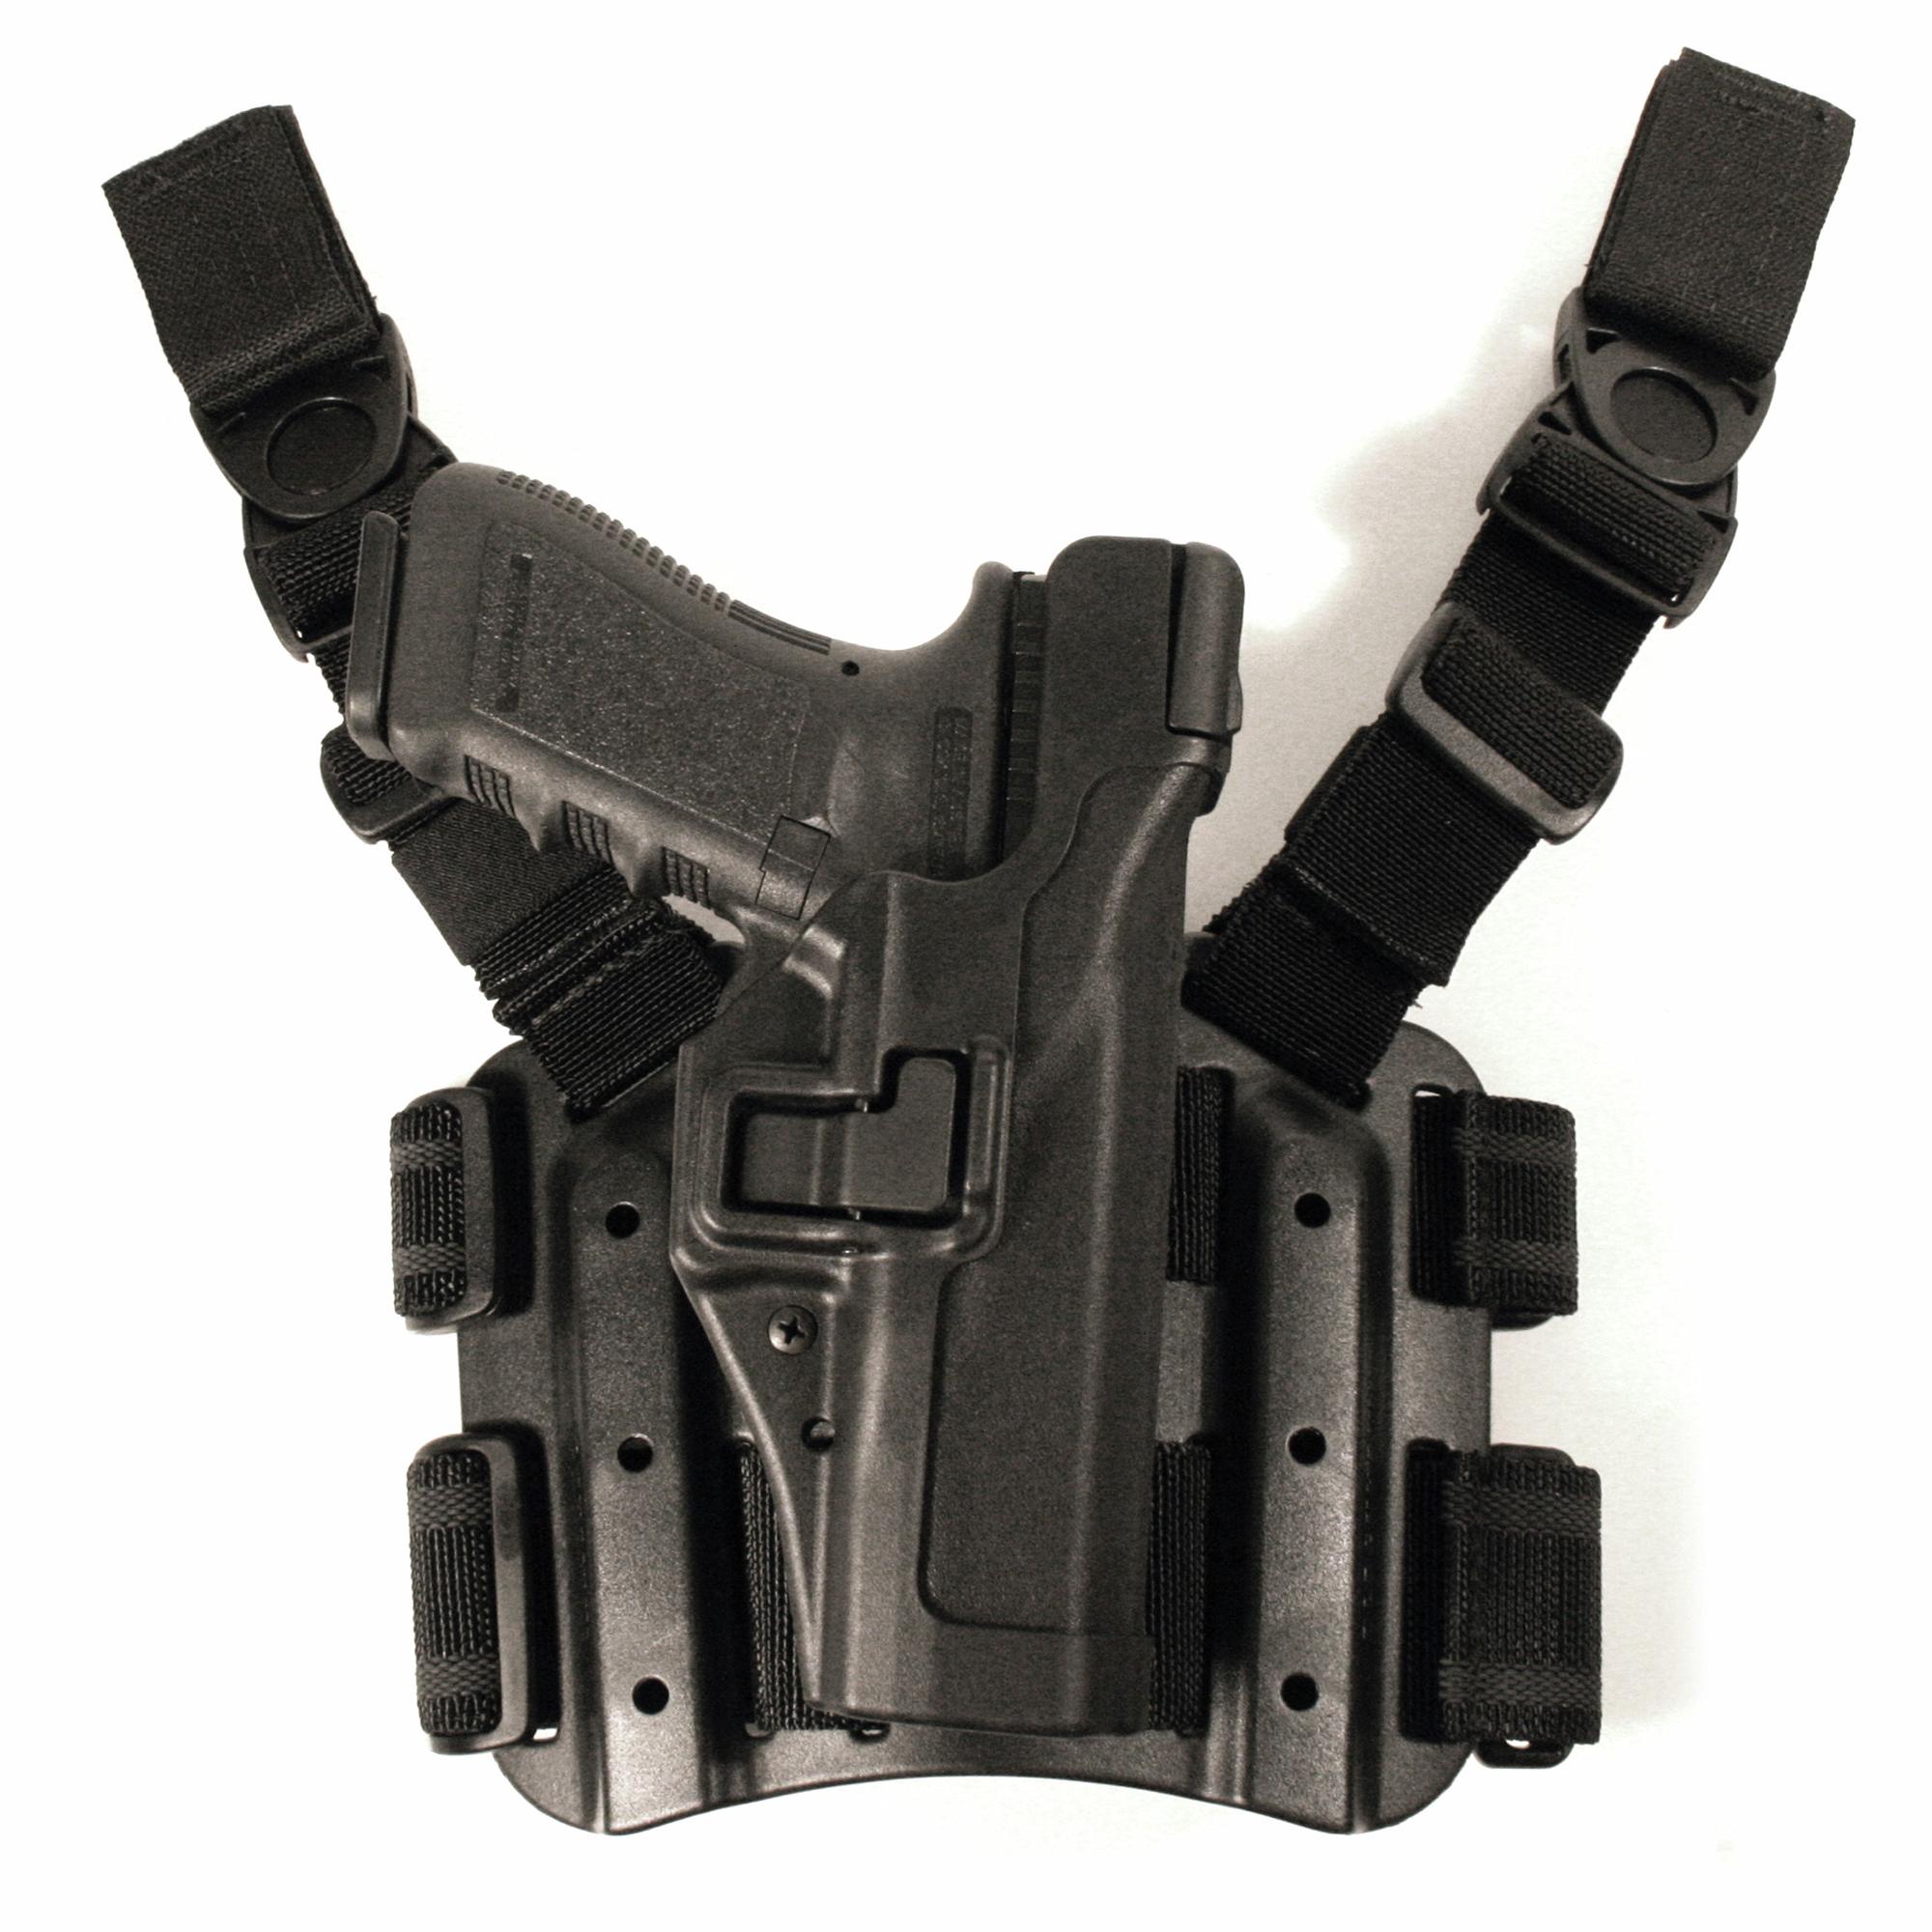 Tested: StealthGearUSA Chest Holster 2.0 For Backcountry Carry